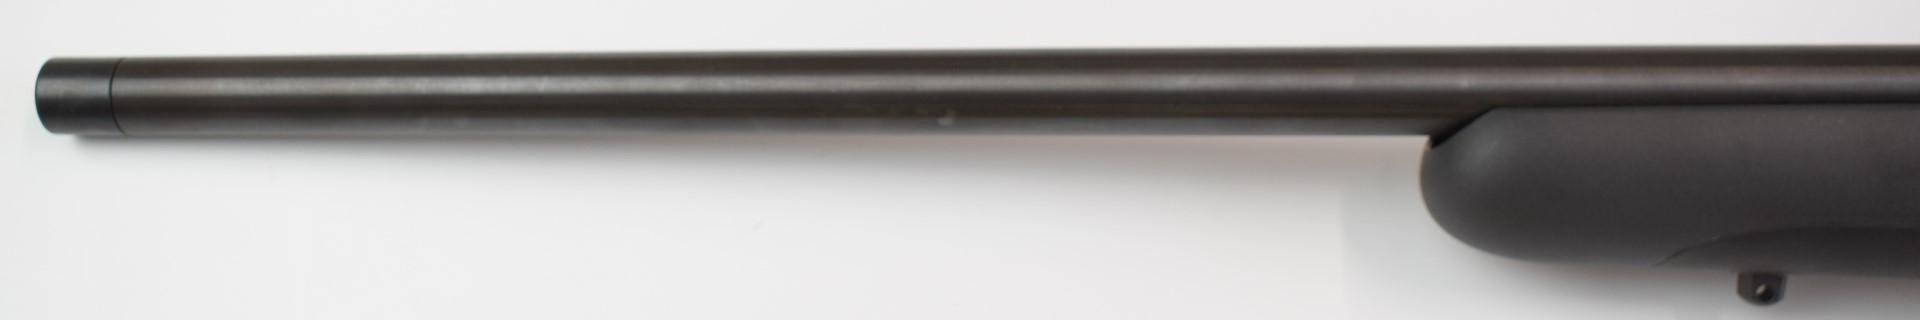 Mauser M18 .243 bolt-action rifle with composite stock, semi-pistol grip, sling mounts and 22.5 inch - Image 19 of 28